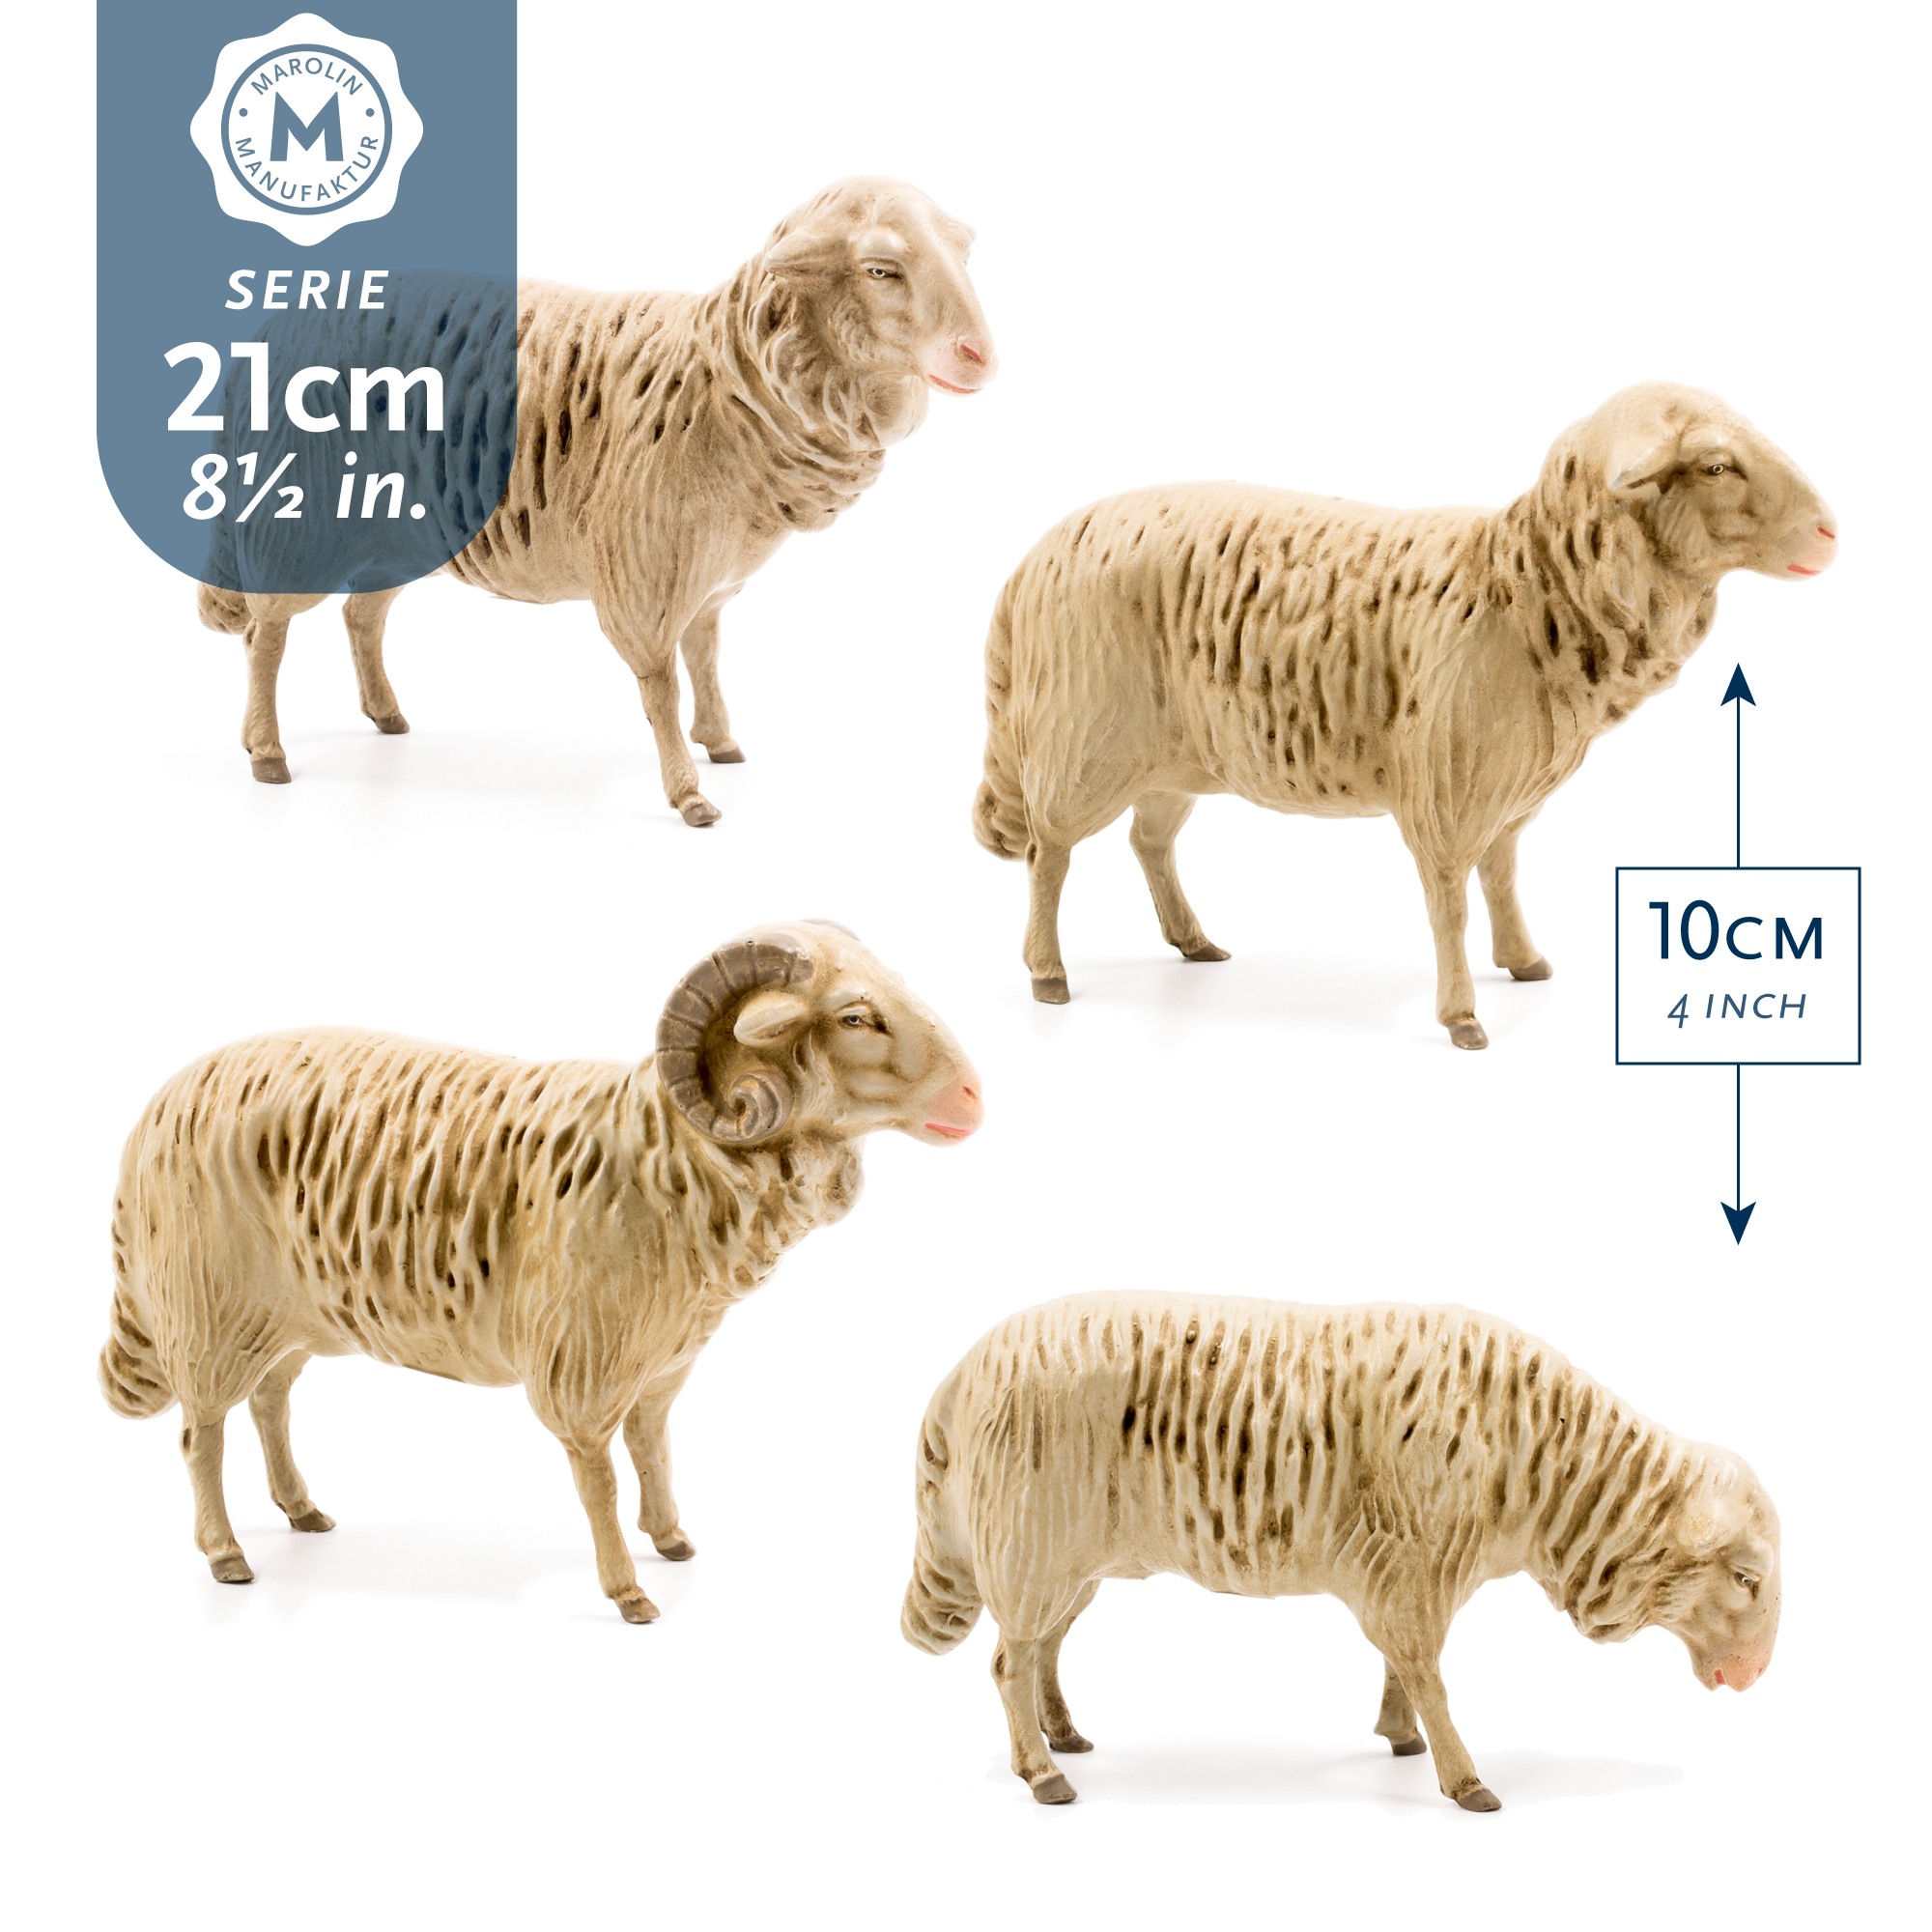 Flock of 4 sheep, to 8.5 in. Nativity figures